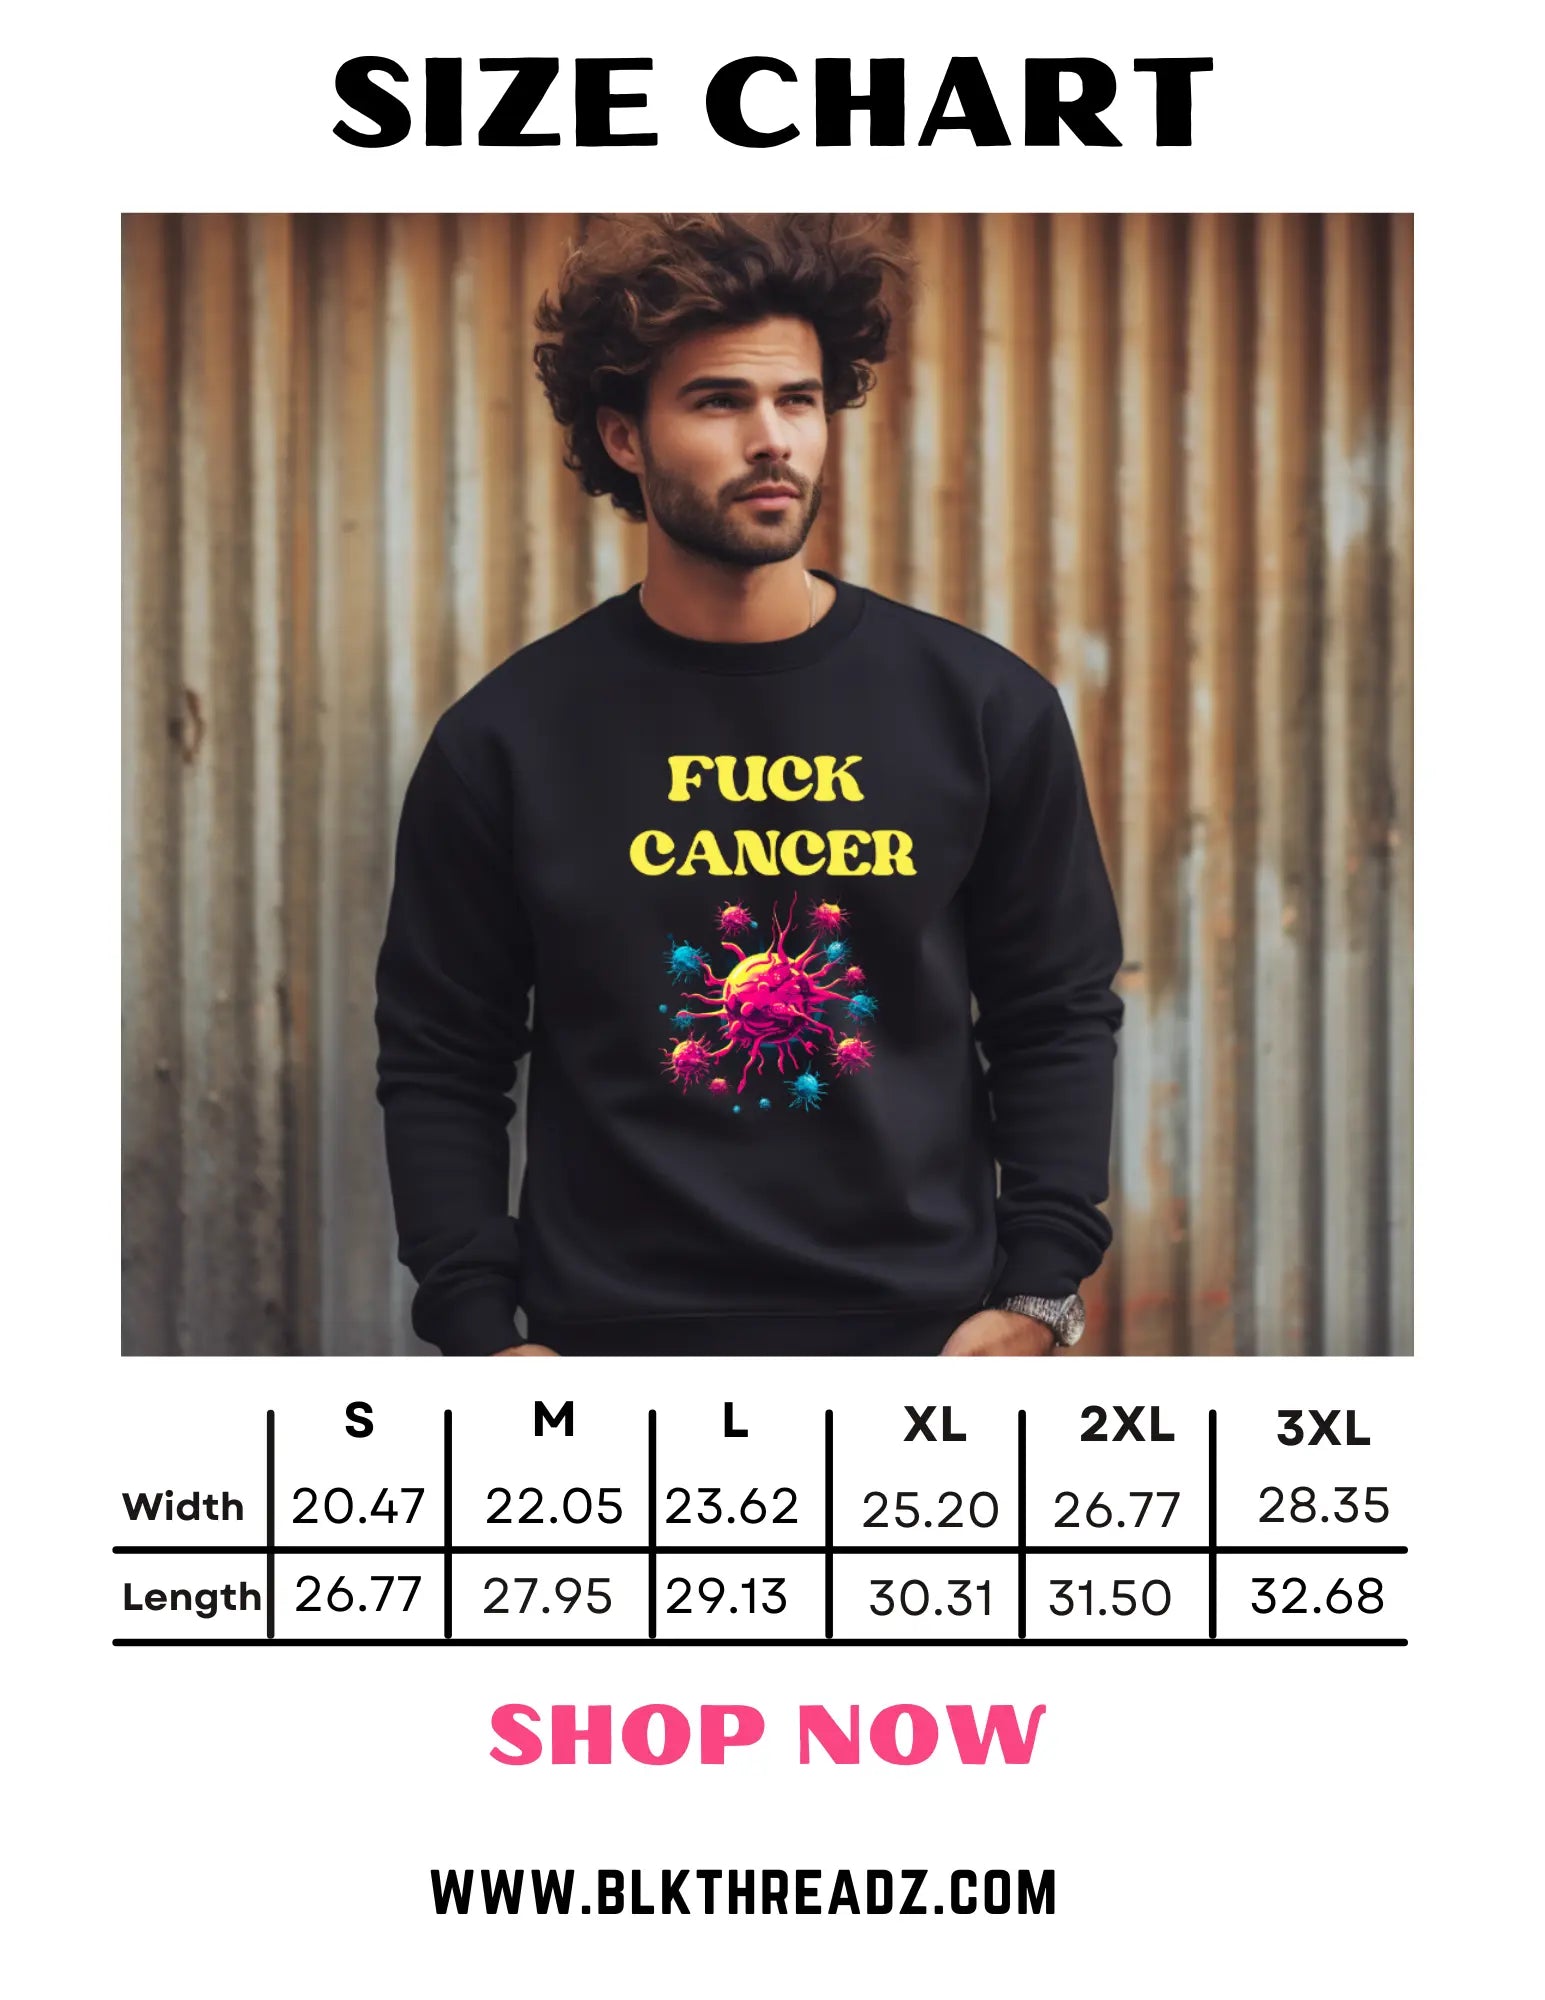 Spitters Are Quitters Sweatshirt: Embrace Resilience and Perseverance - Black Threadz